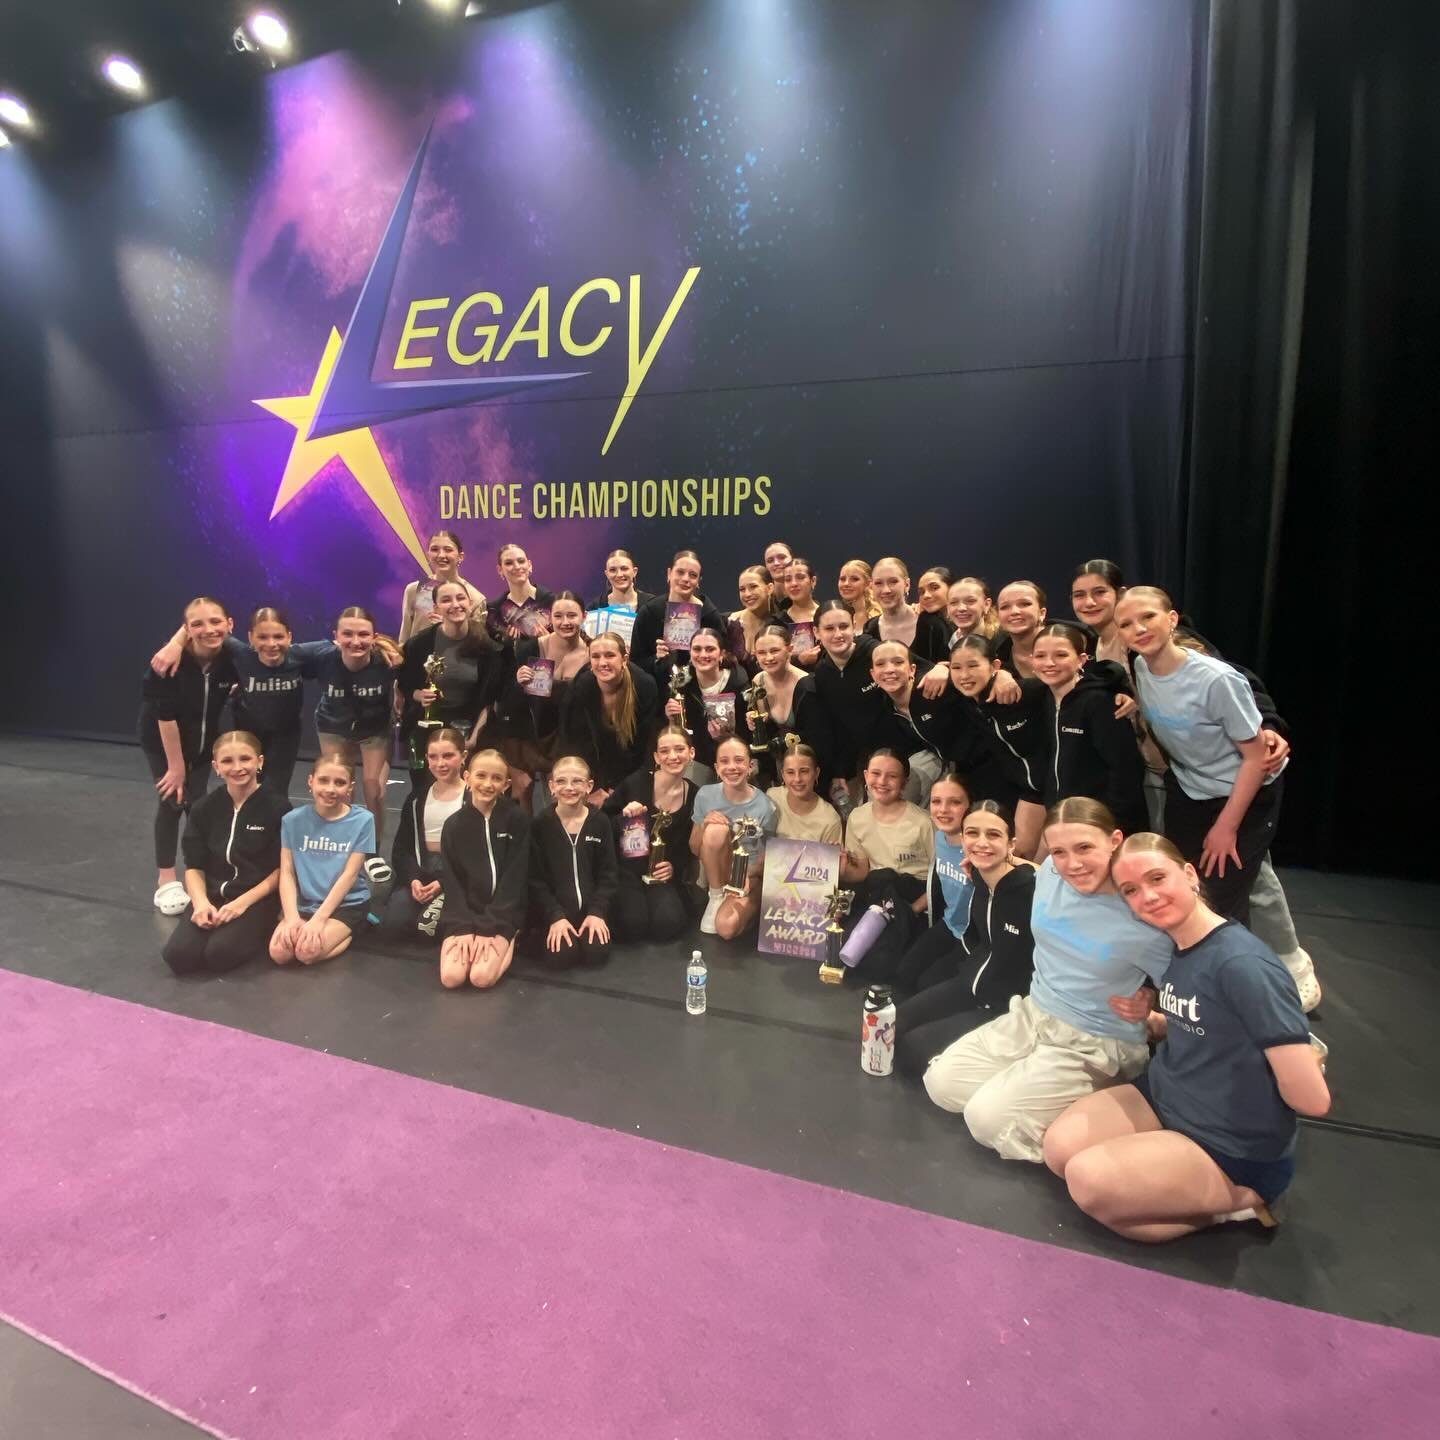 WOW! We had such an incredible last regional competition weekend at @legacydancechampionships 🎉

Over the entire weekend, we had a total of 50 Overalls (8 of them being 1st Overalls!) and BOTH the 12 &amp; under and 13 &amp; over Legacy Awards! 

We